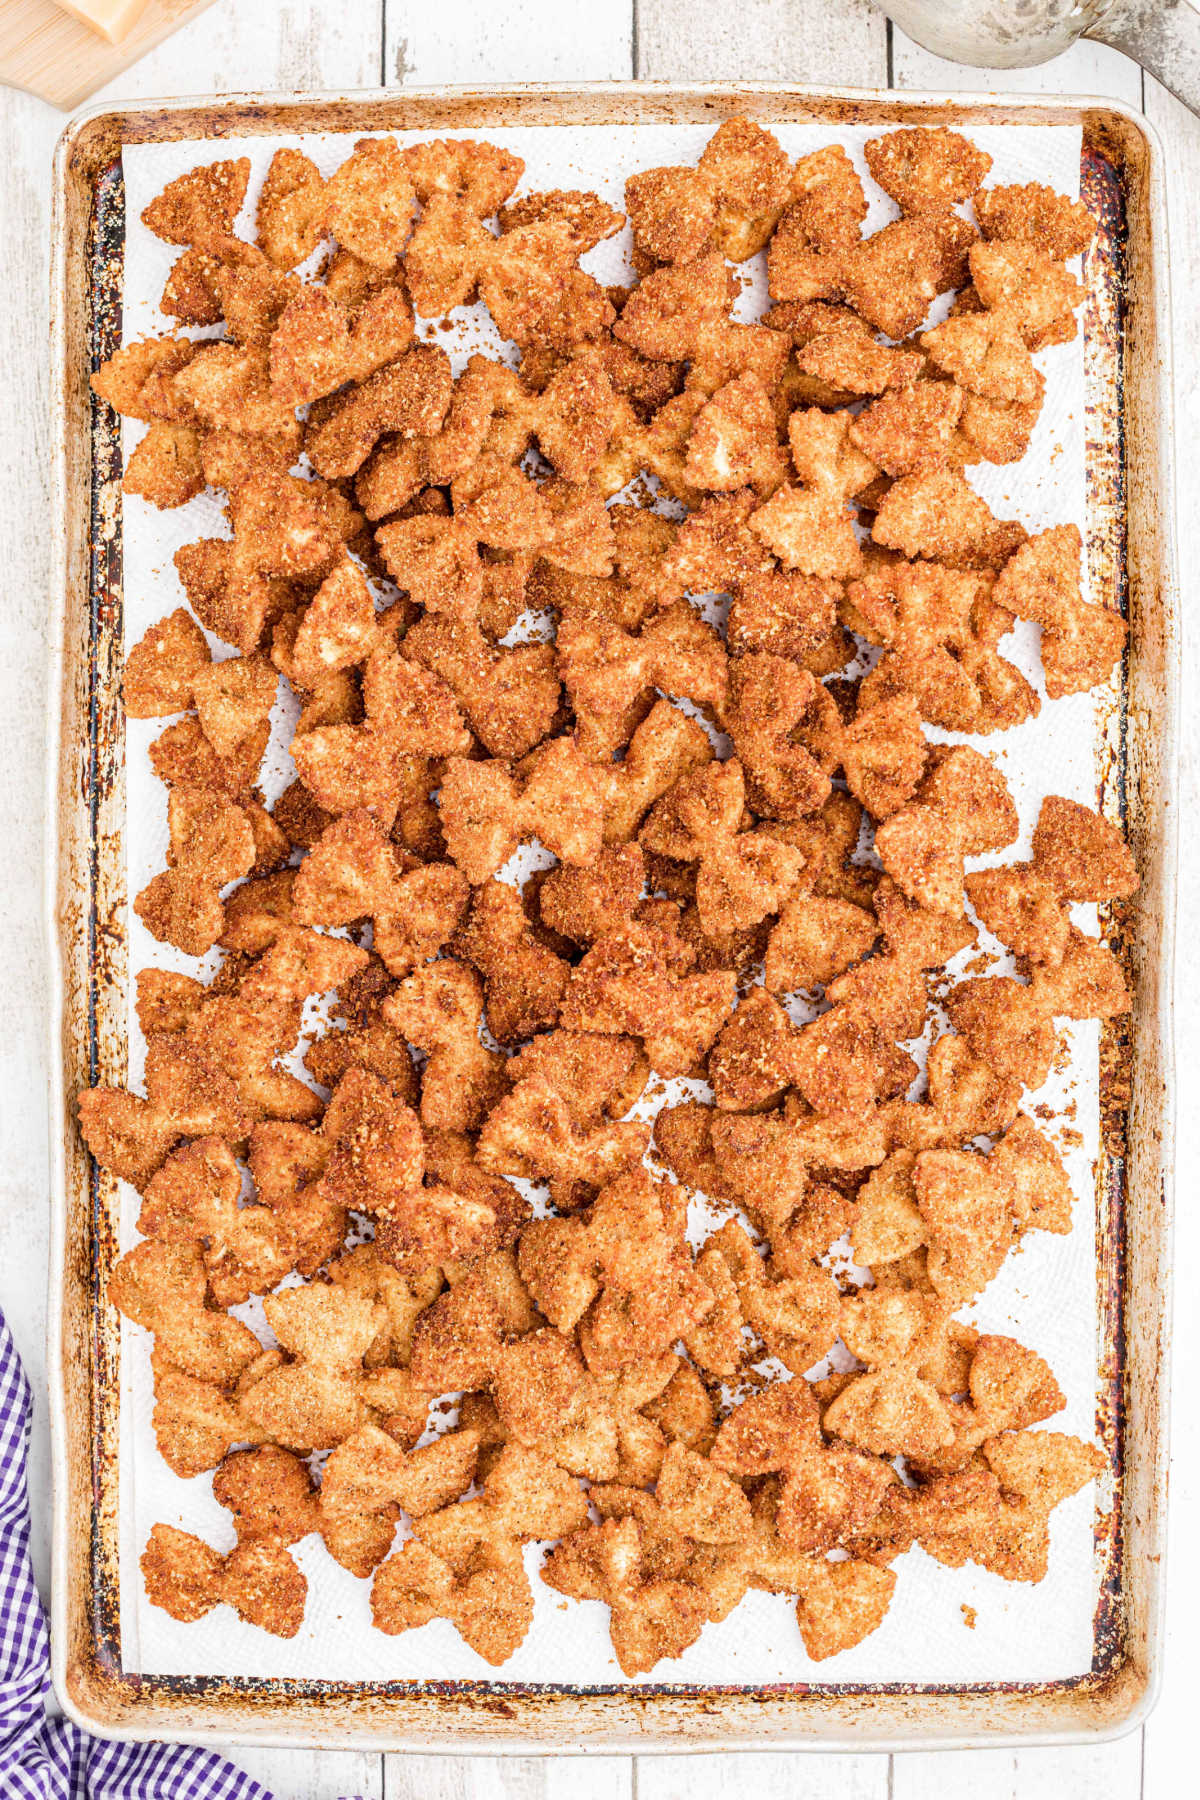 a tray full of fried bowtie pasta draining on paper towels